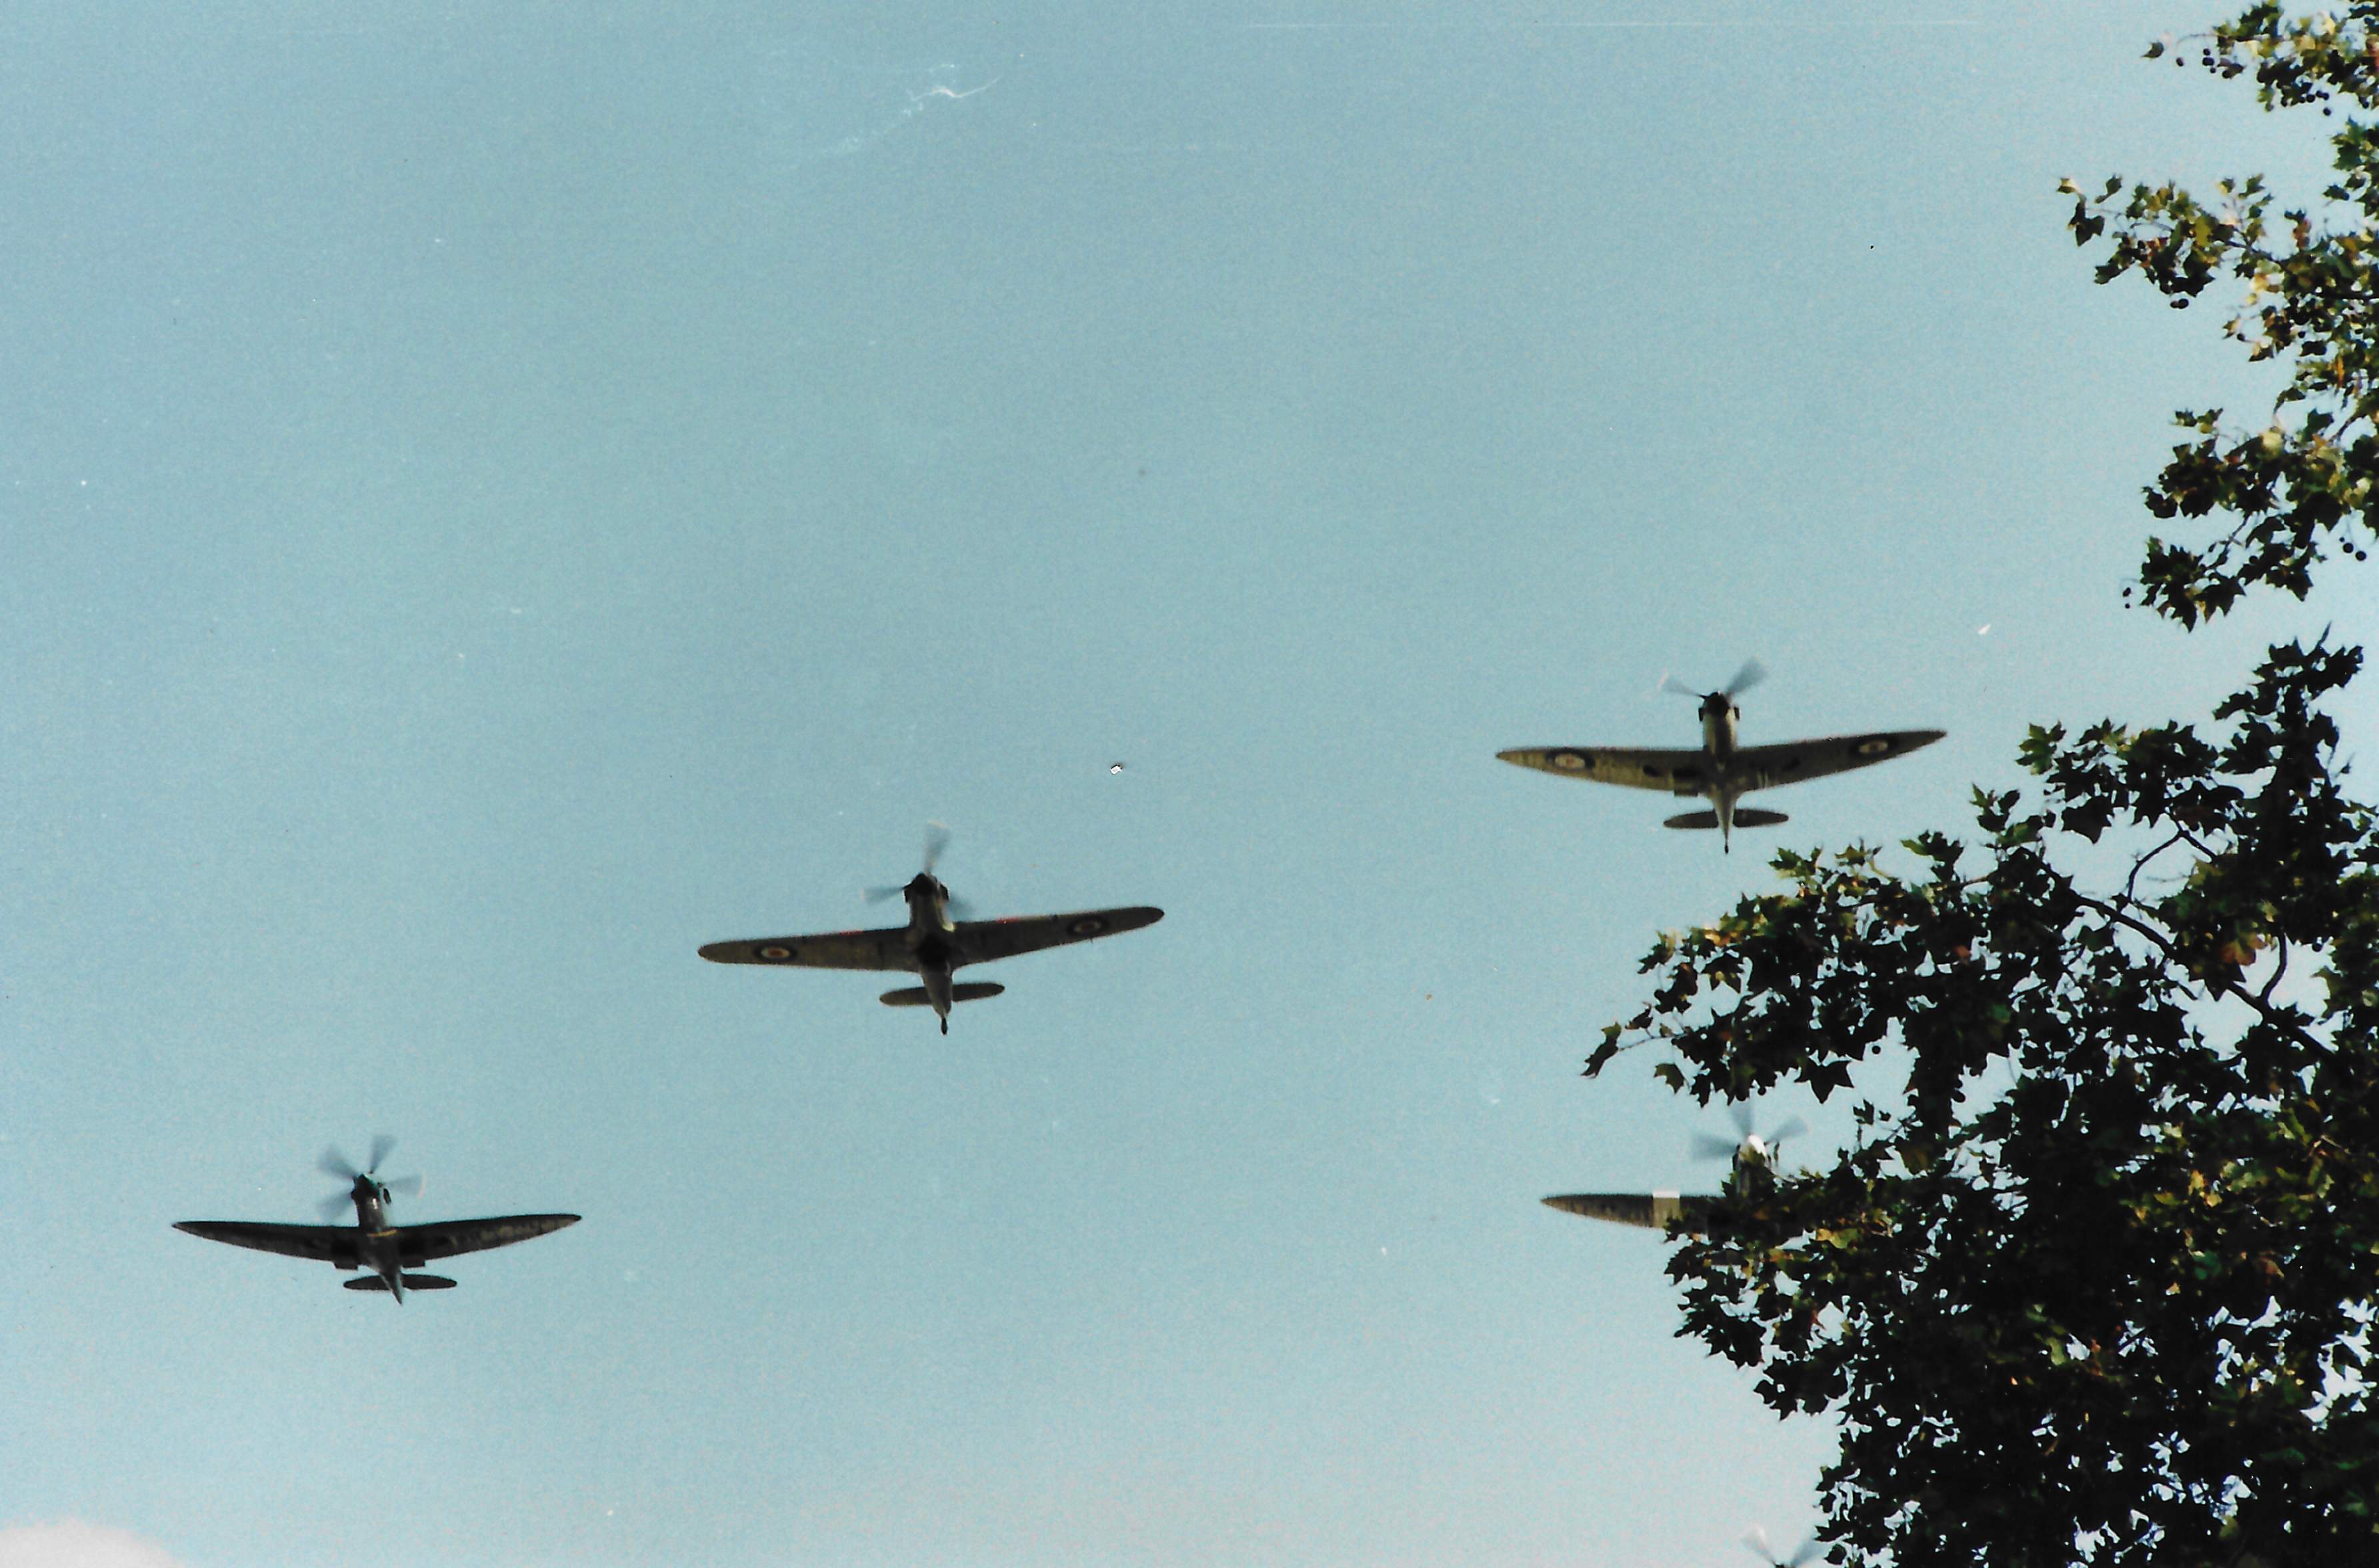 Opening with all Airworthy Spitfires and Hurricanes available